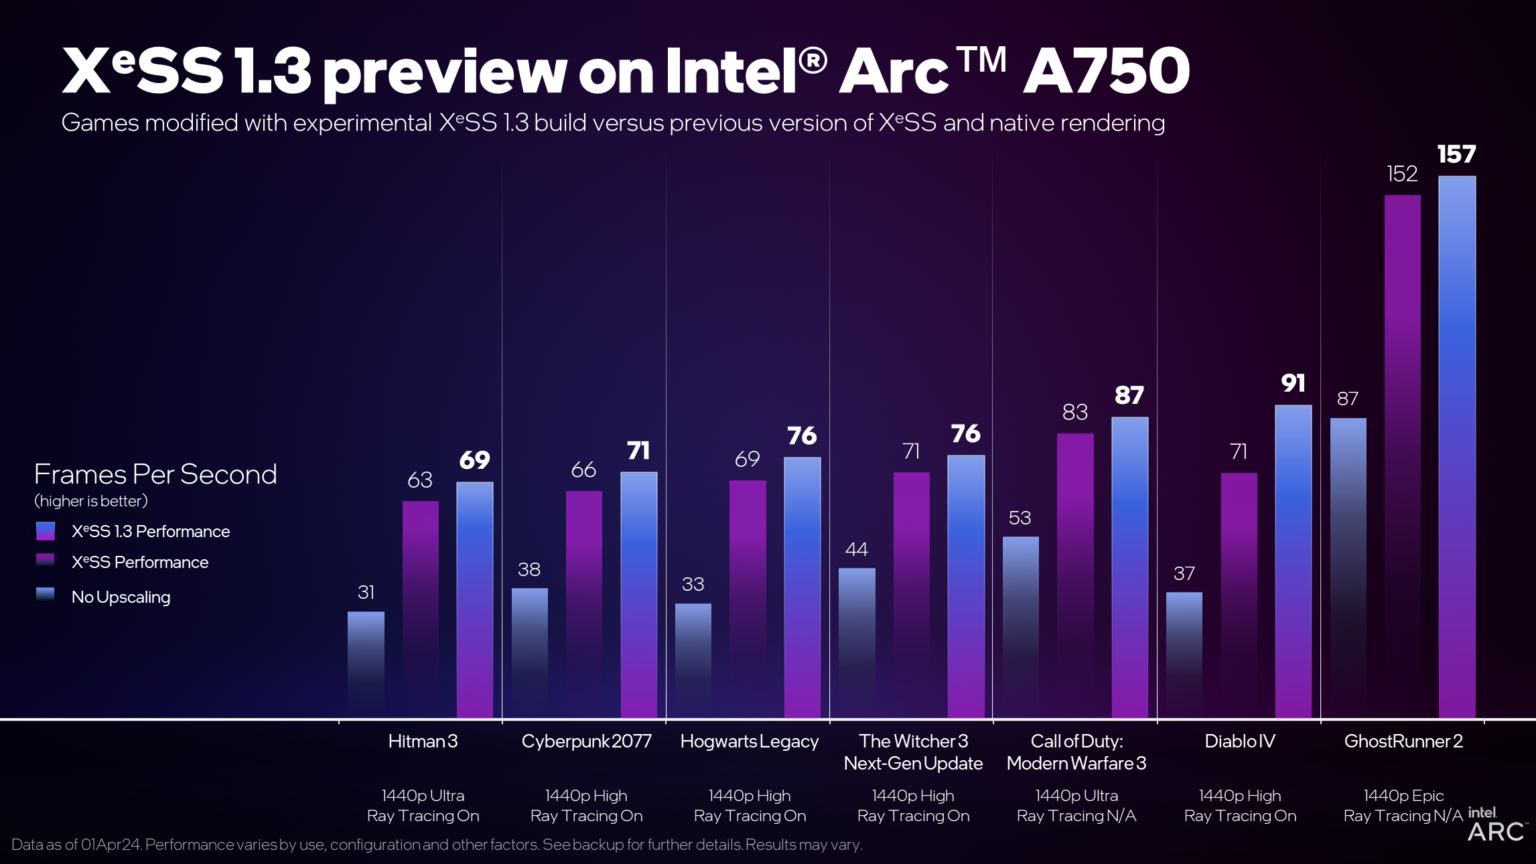 A graph showing performance figures for the Intel Arc A750 GPU running XeSS 1.3